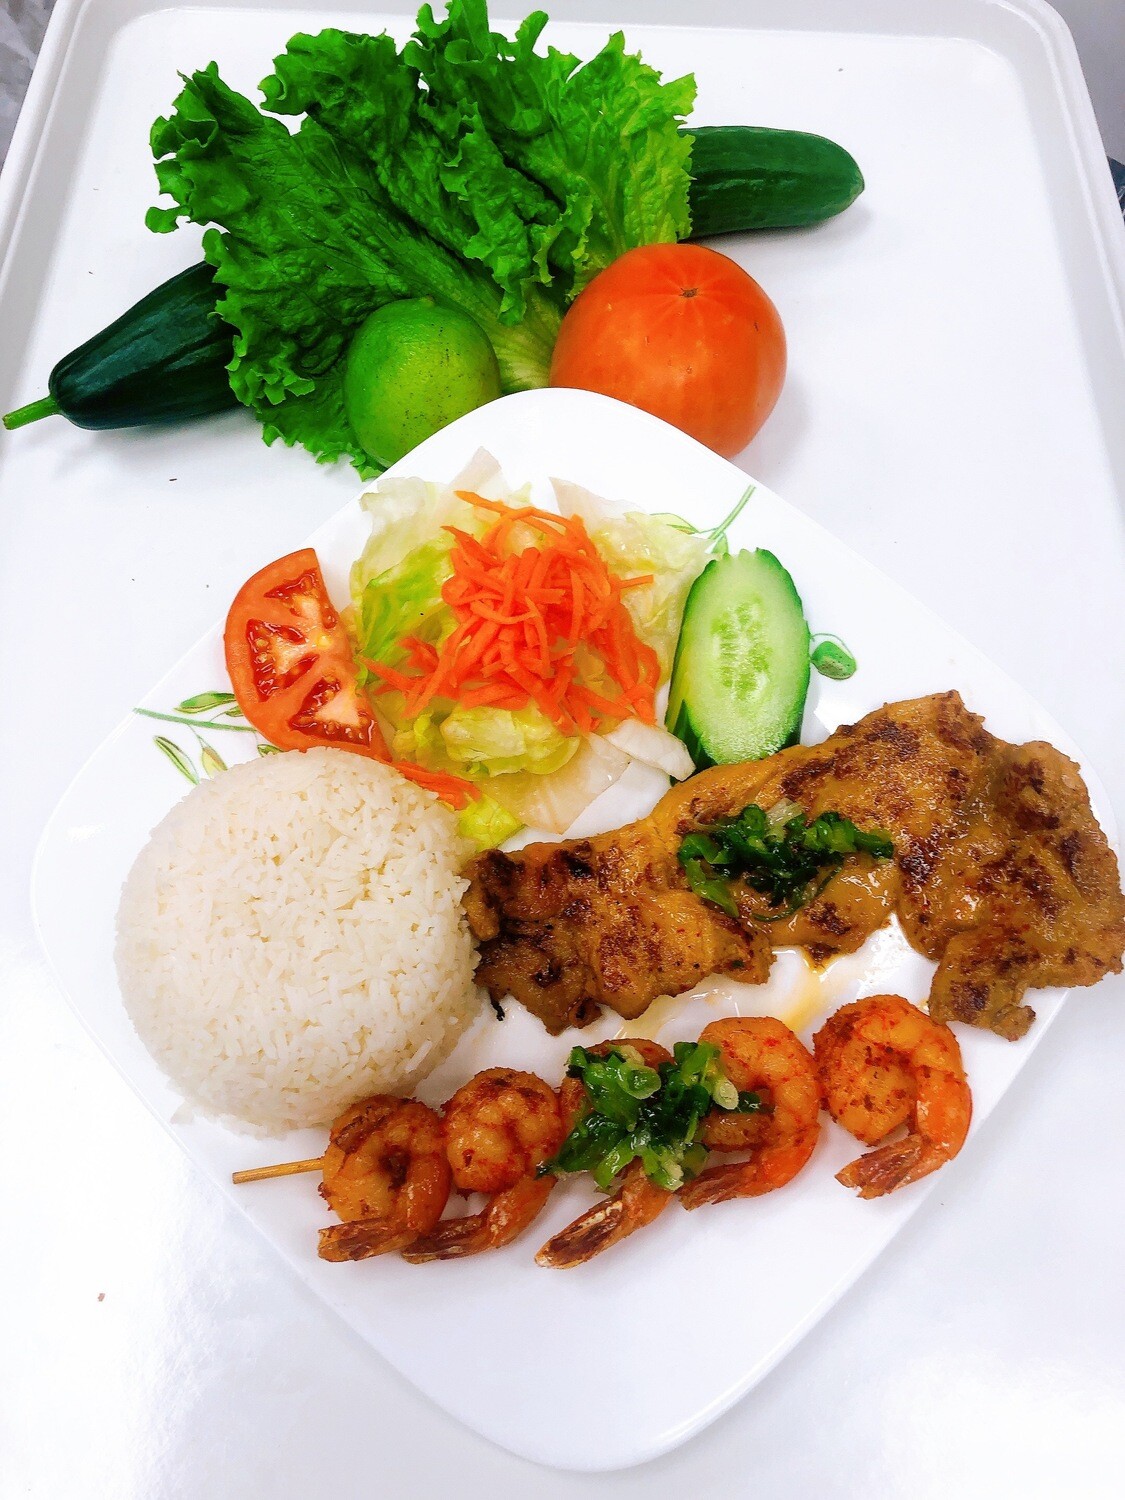 509- Grilled Tiger Shrimp (5 pcs) with Satay Sauce on Steamed Rice (Plus One Item)